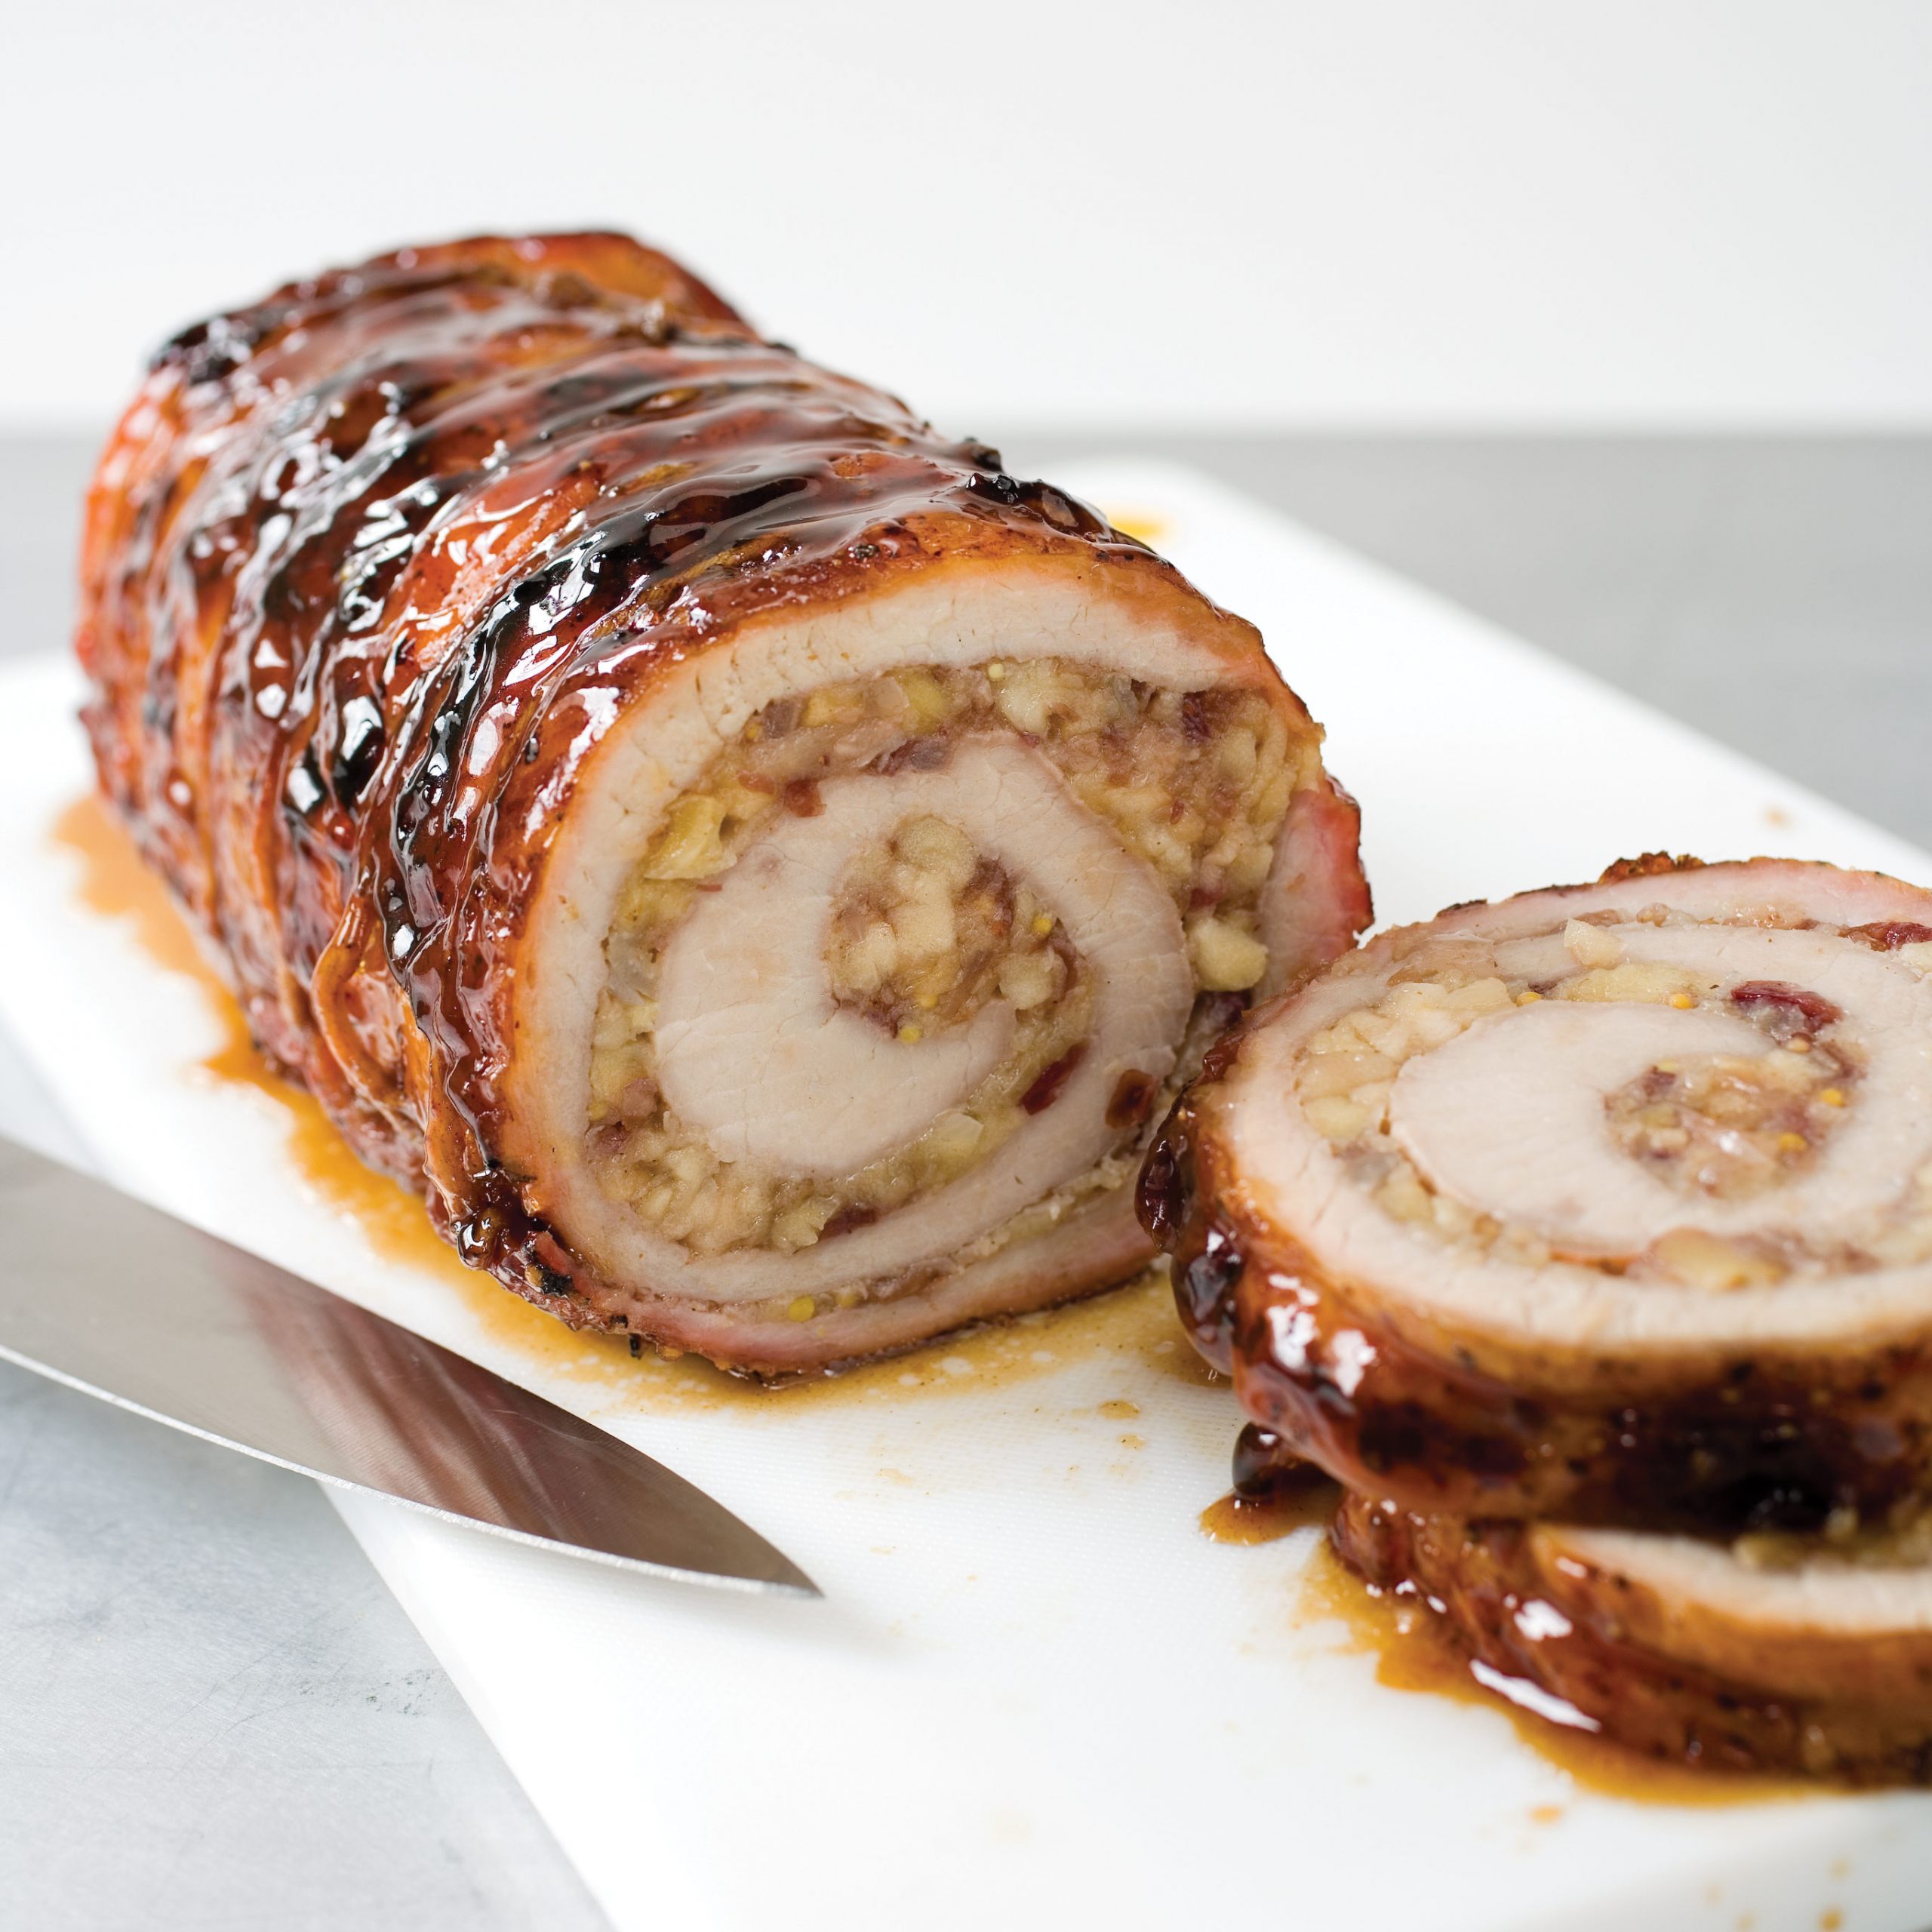 Pork Loin Grill Recipe
 Grilled Pork Loin with Apple Cranberry Filling on a